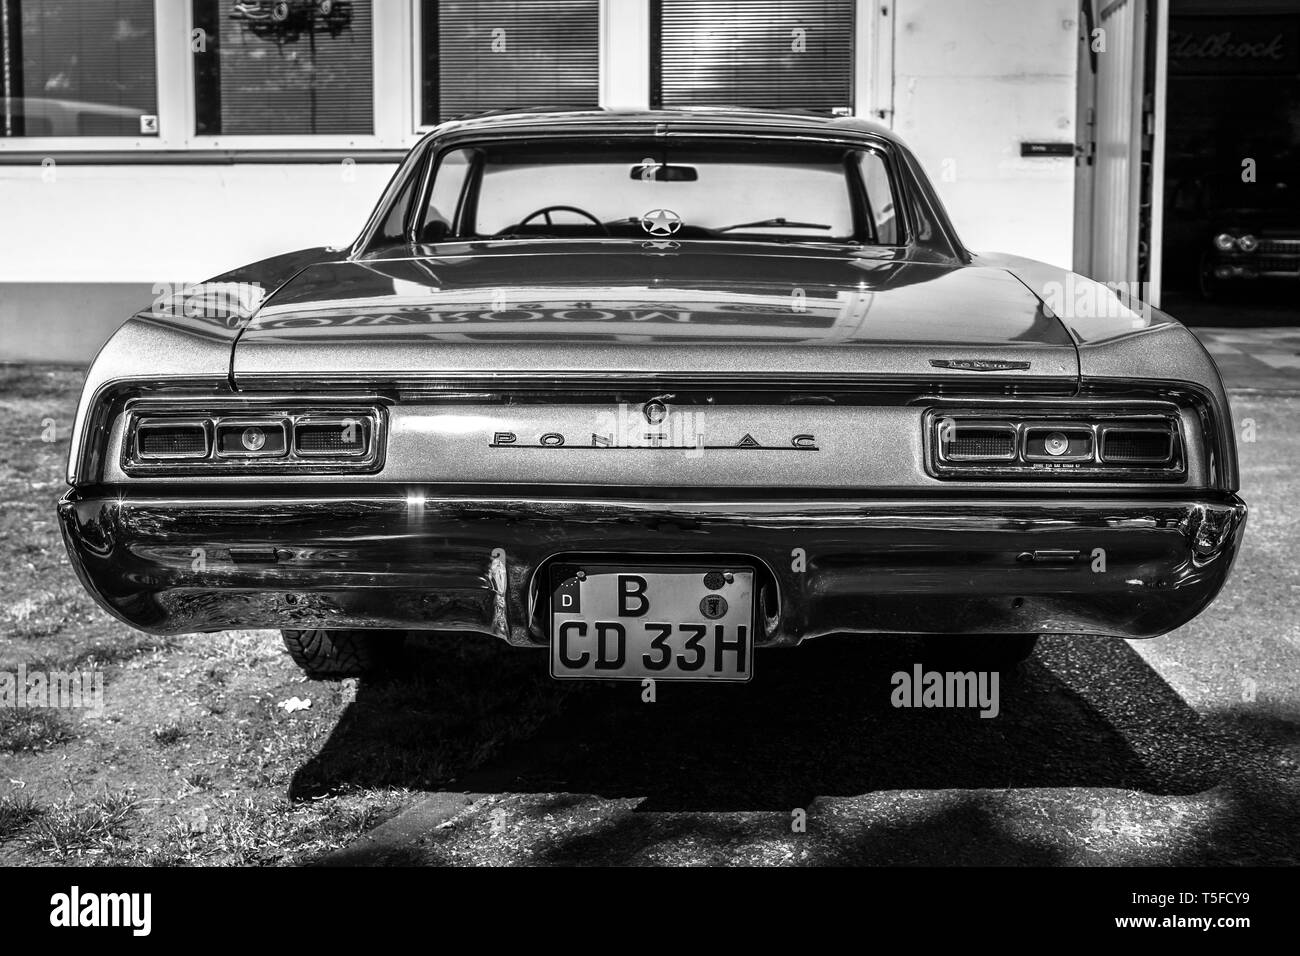 BERLIN - MAY 05, 2018: The mid-size car Pontiac LeMans, 1967. Rear view. Black and white. Stock Photo